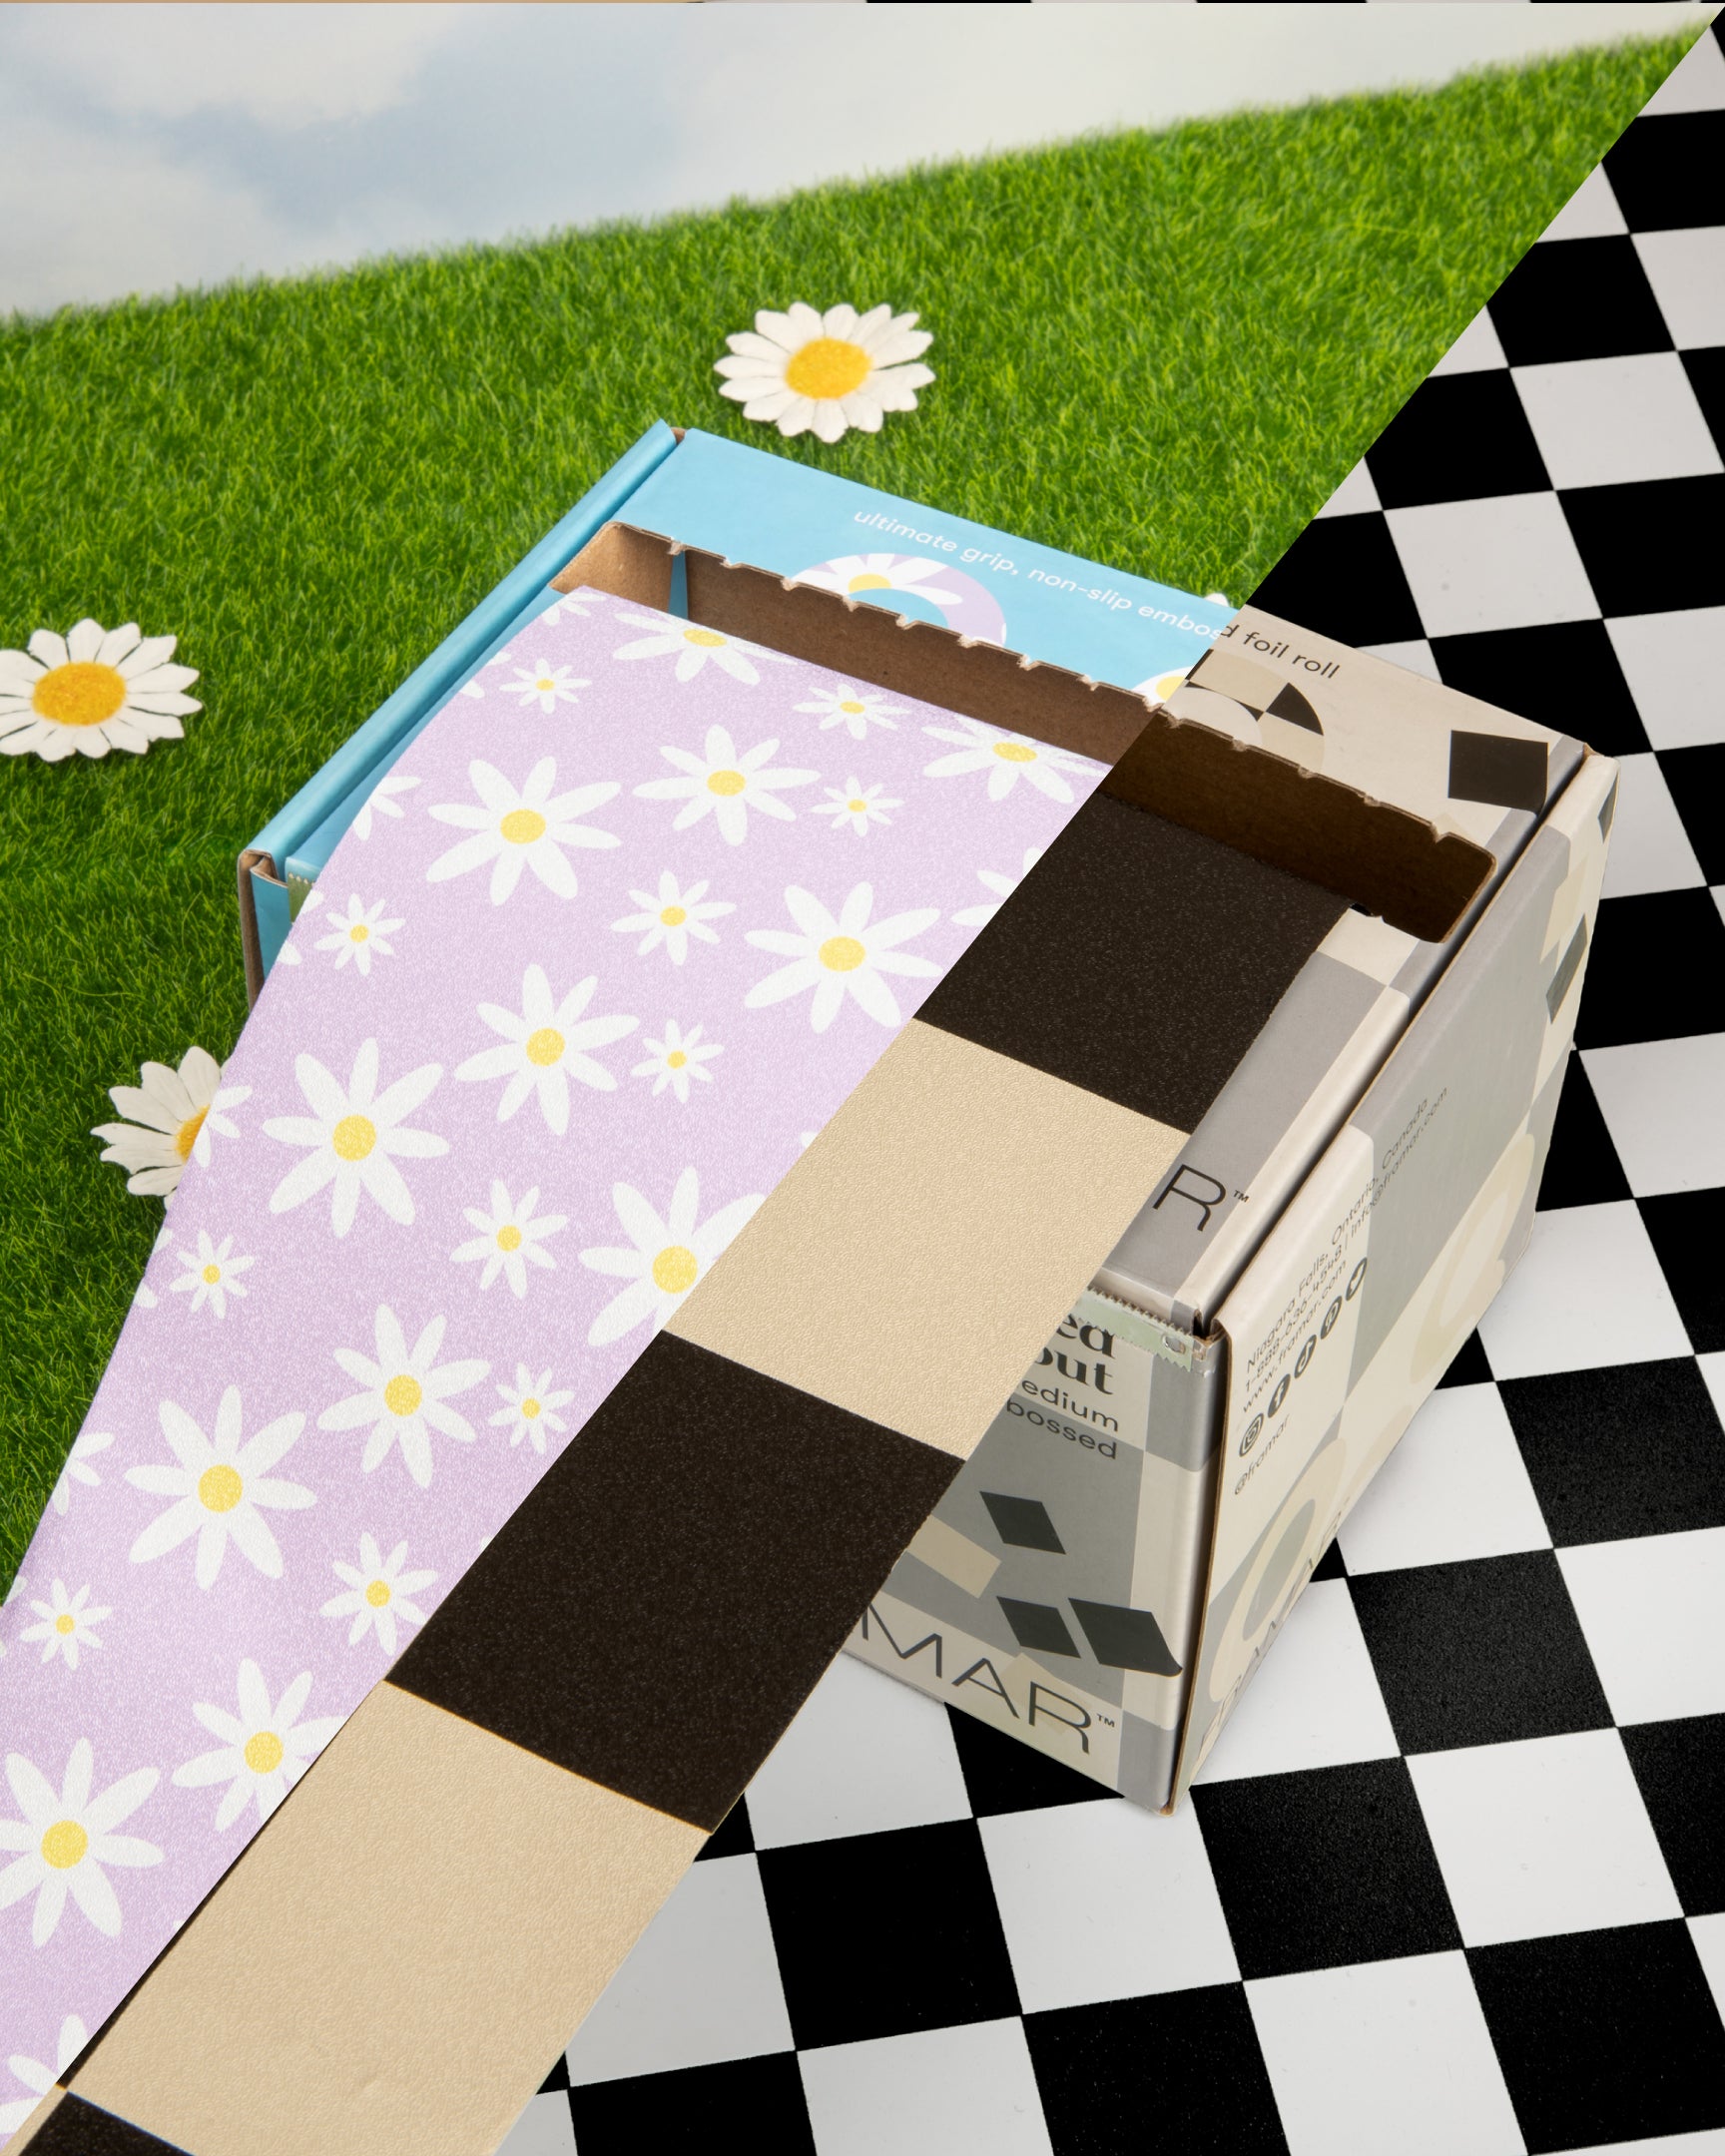 A skateboard on a surreal checkerboard and grass background.